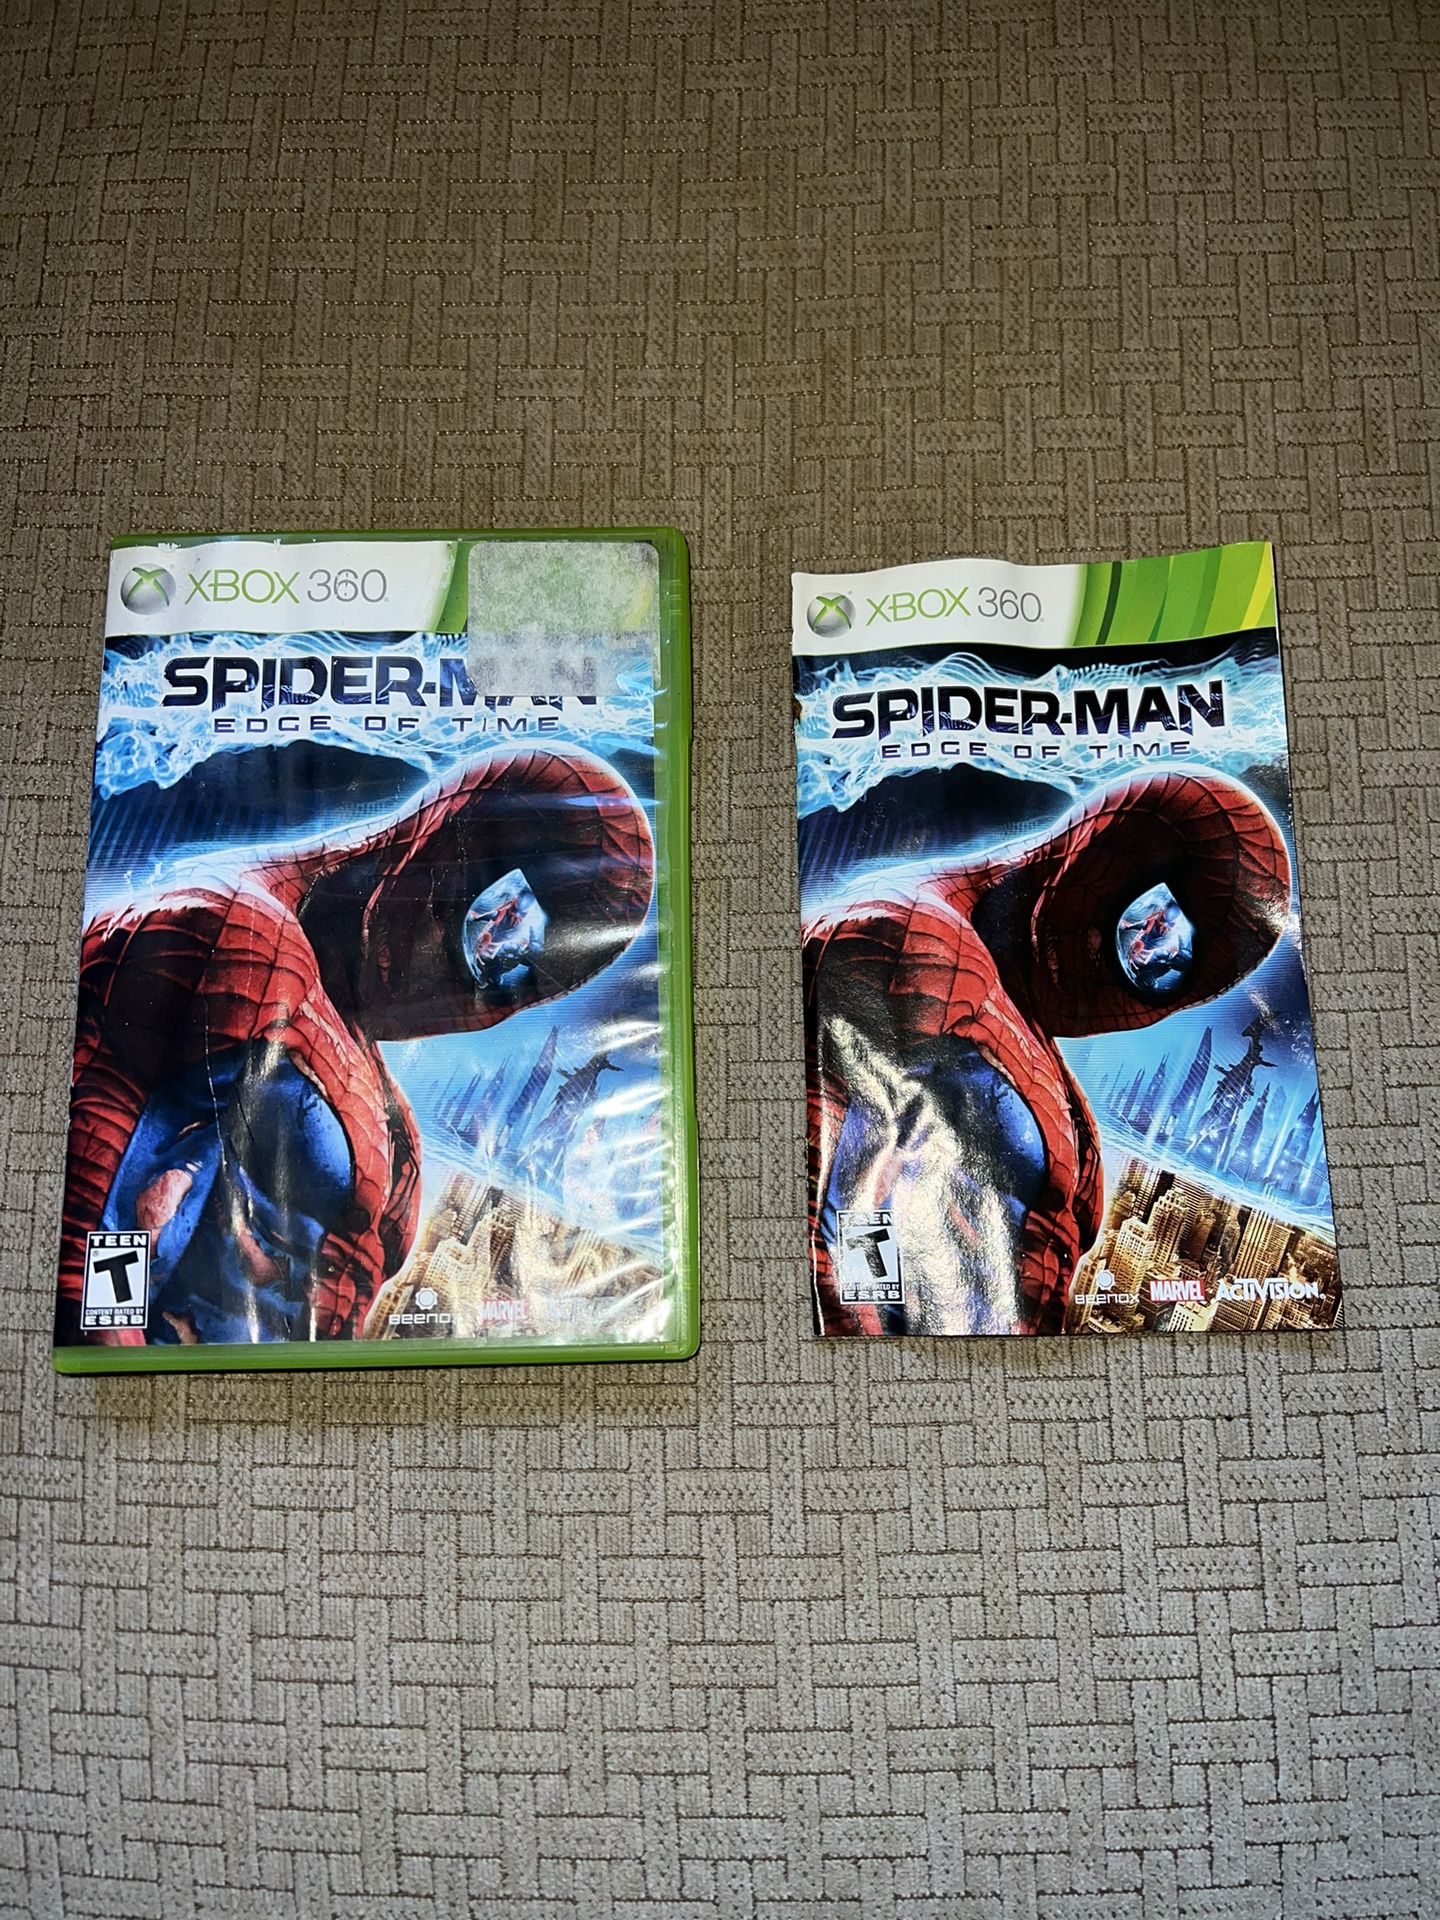 Spiderman Edge Of Time For Xbox 360 (CASE AND MANUAL/ DMG)